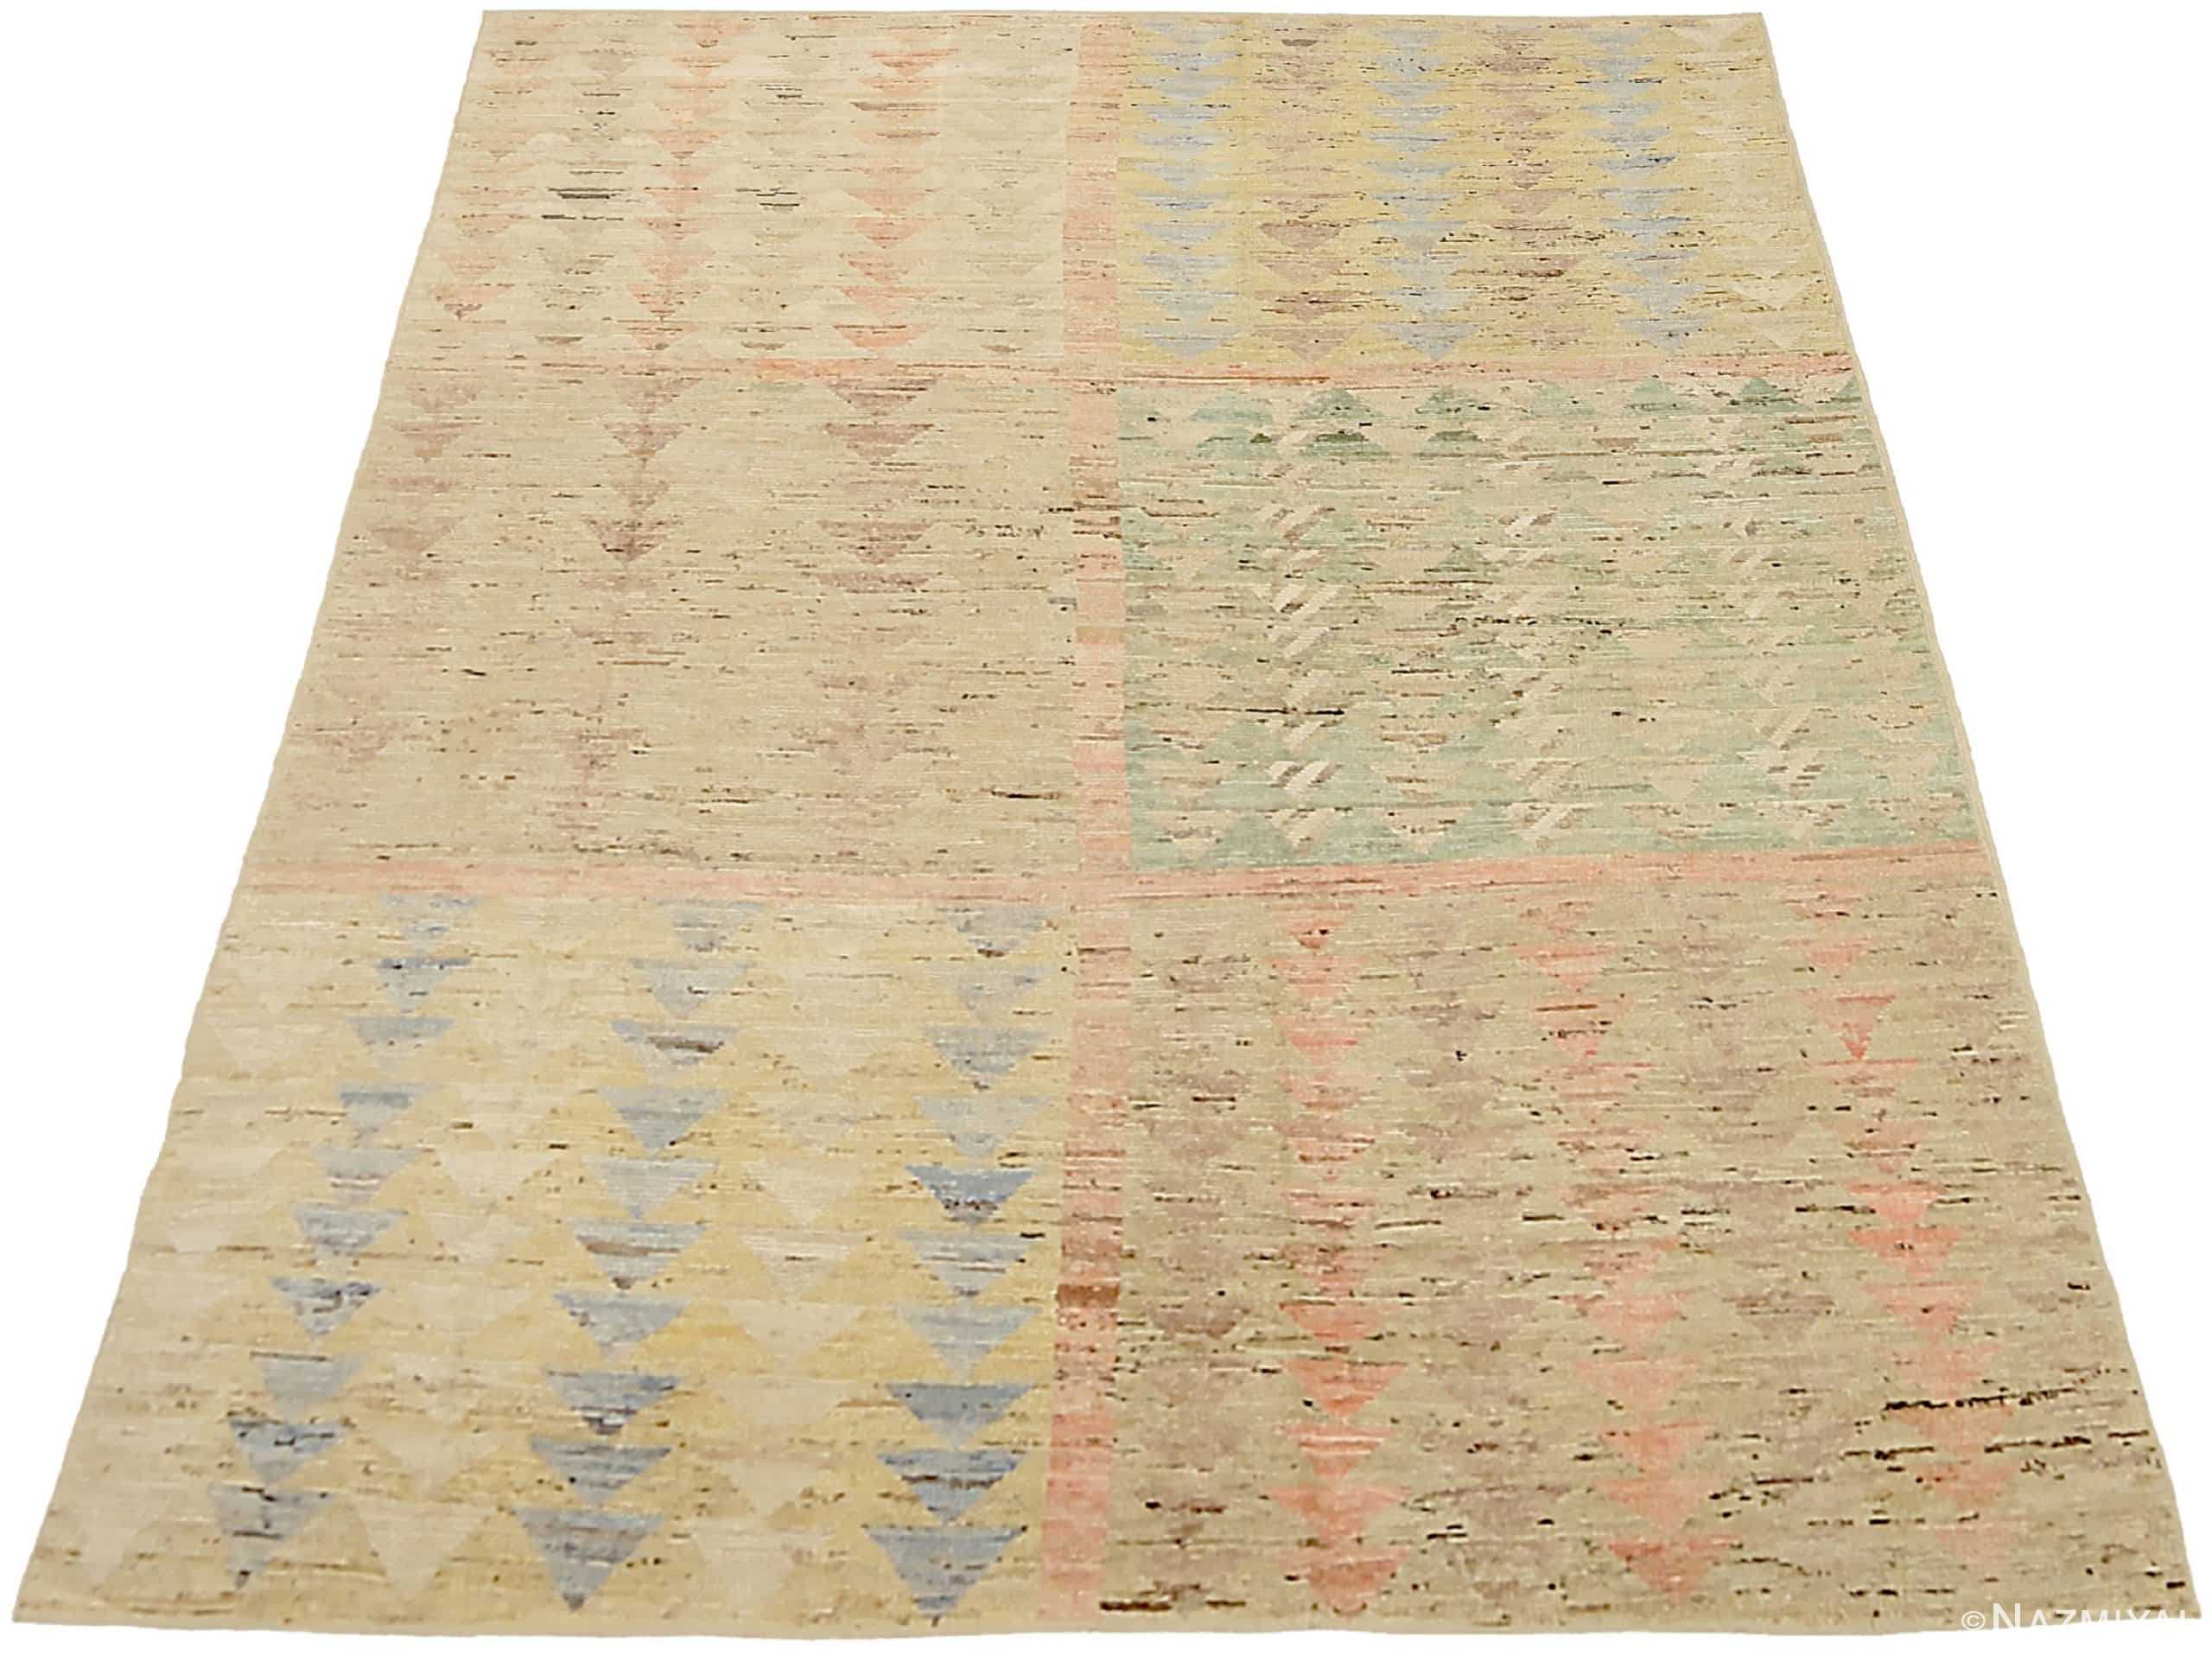 Whole View Of Green Colorful Geometric Modern Distressed Rug 60833 by Nazmiyal Antique Rugs